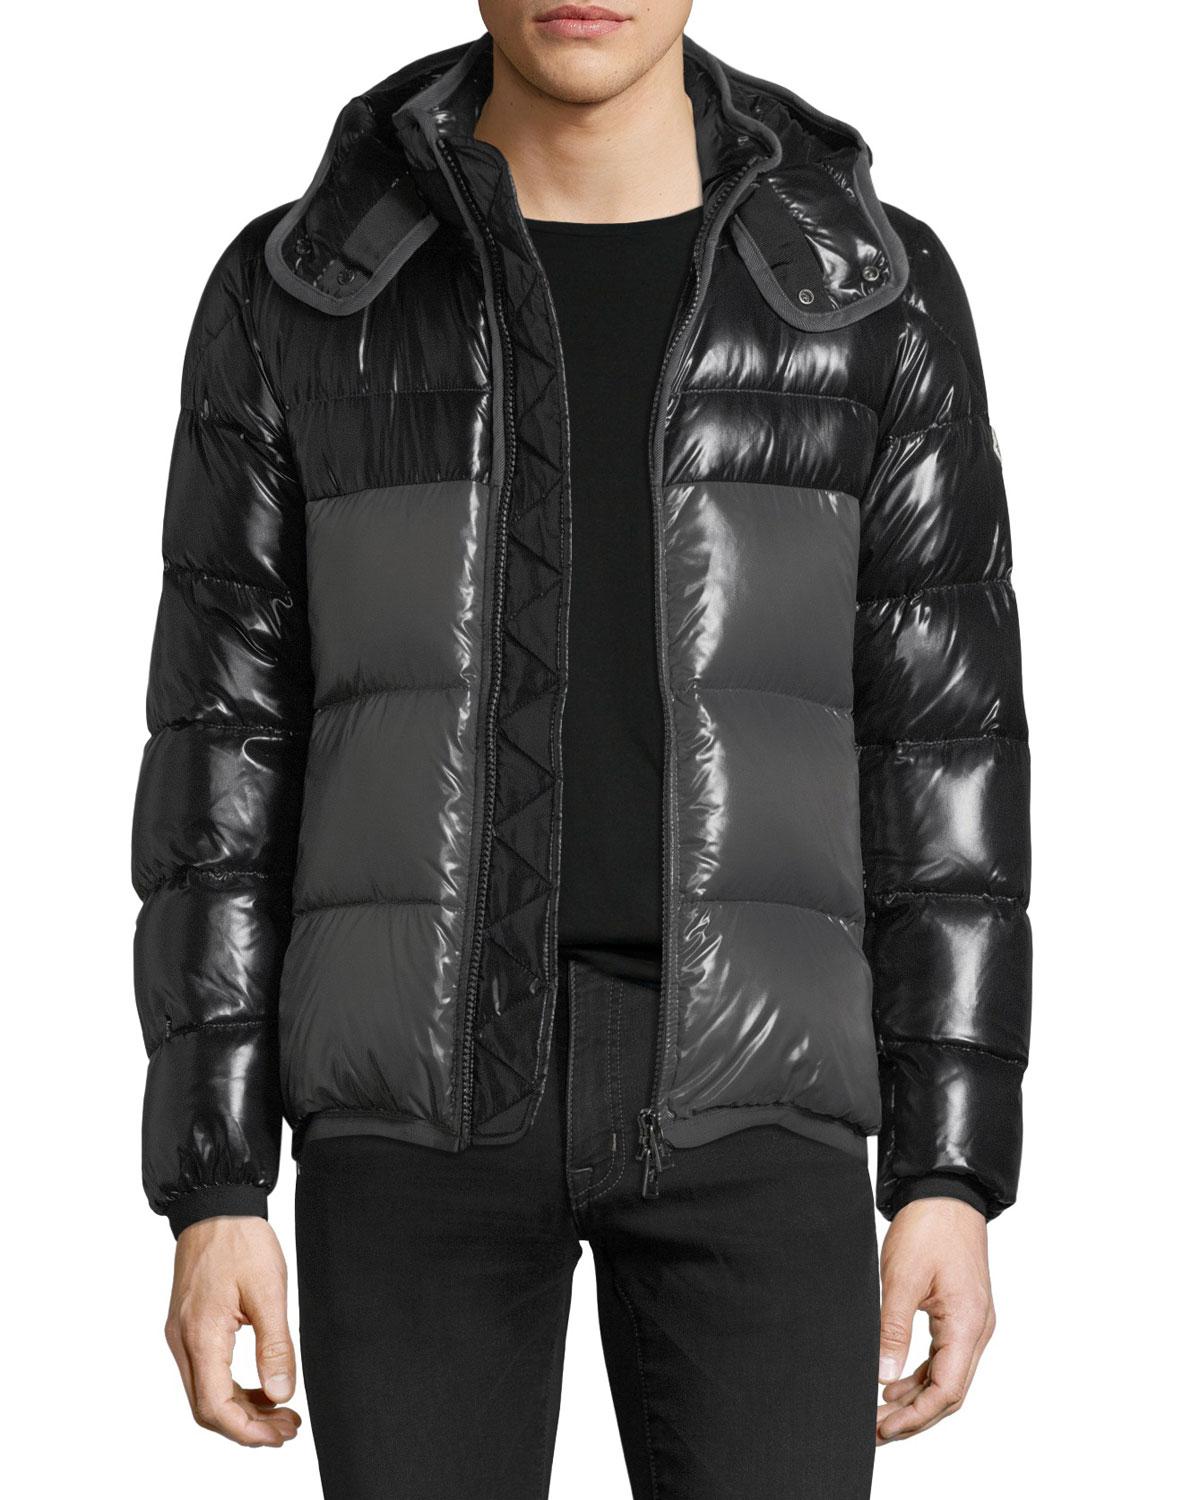 Lyst - Moncler Harry Shiny Puffer Jacket W/ Removable Hood in Black for Men